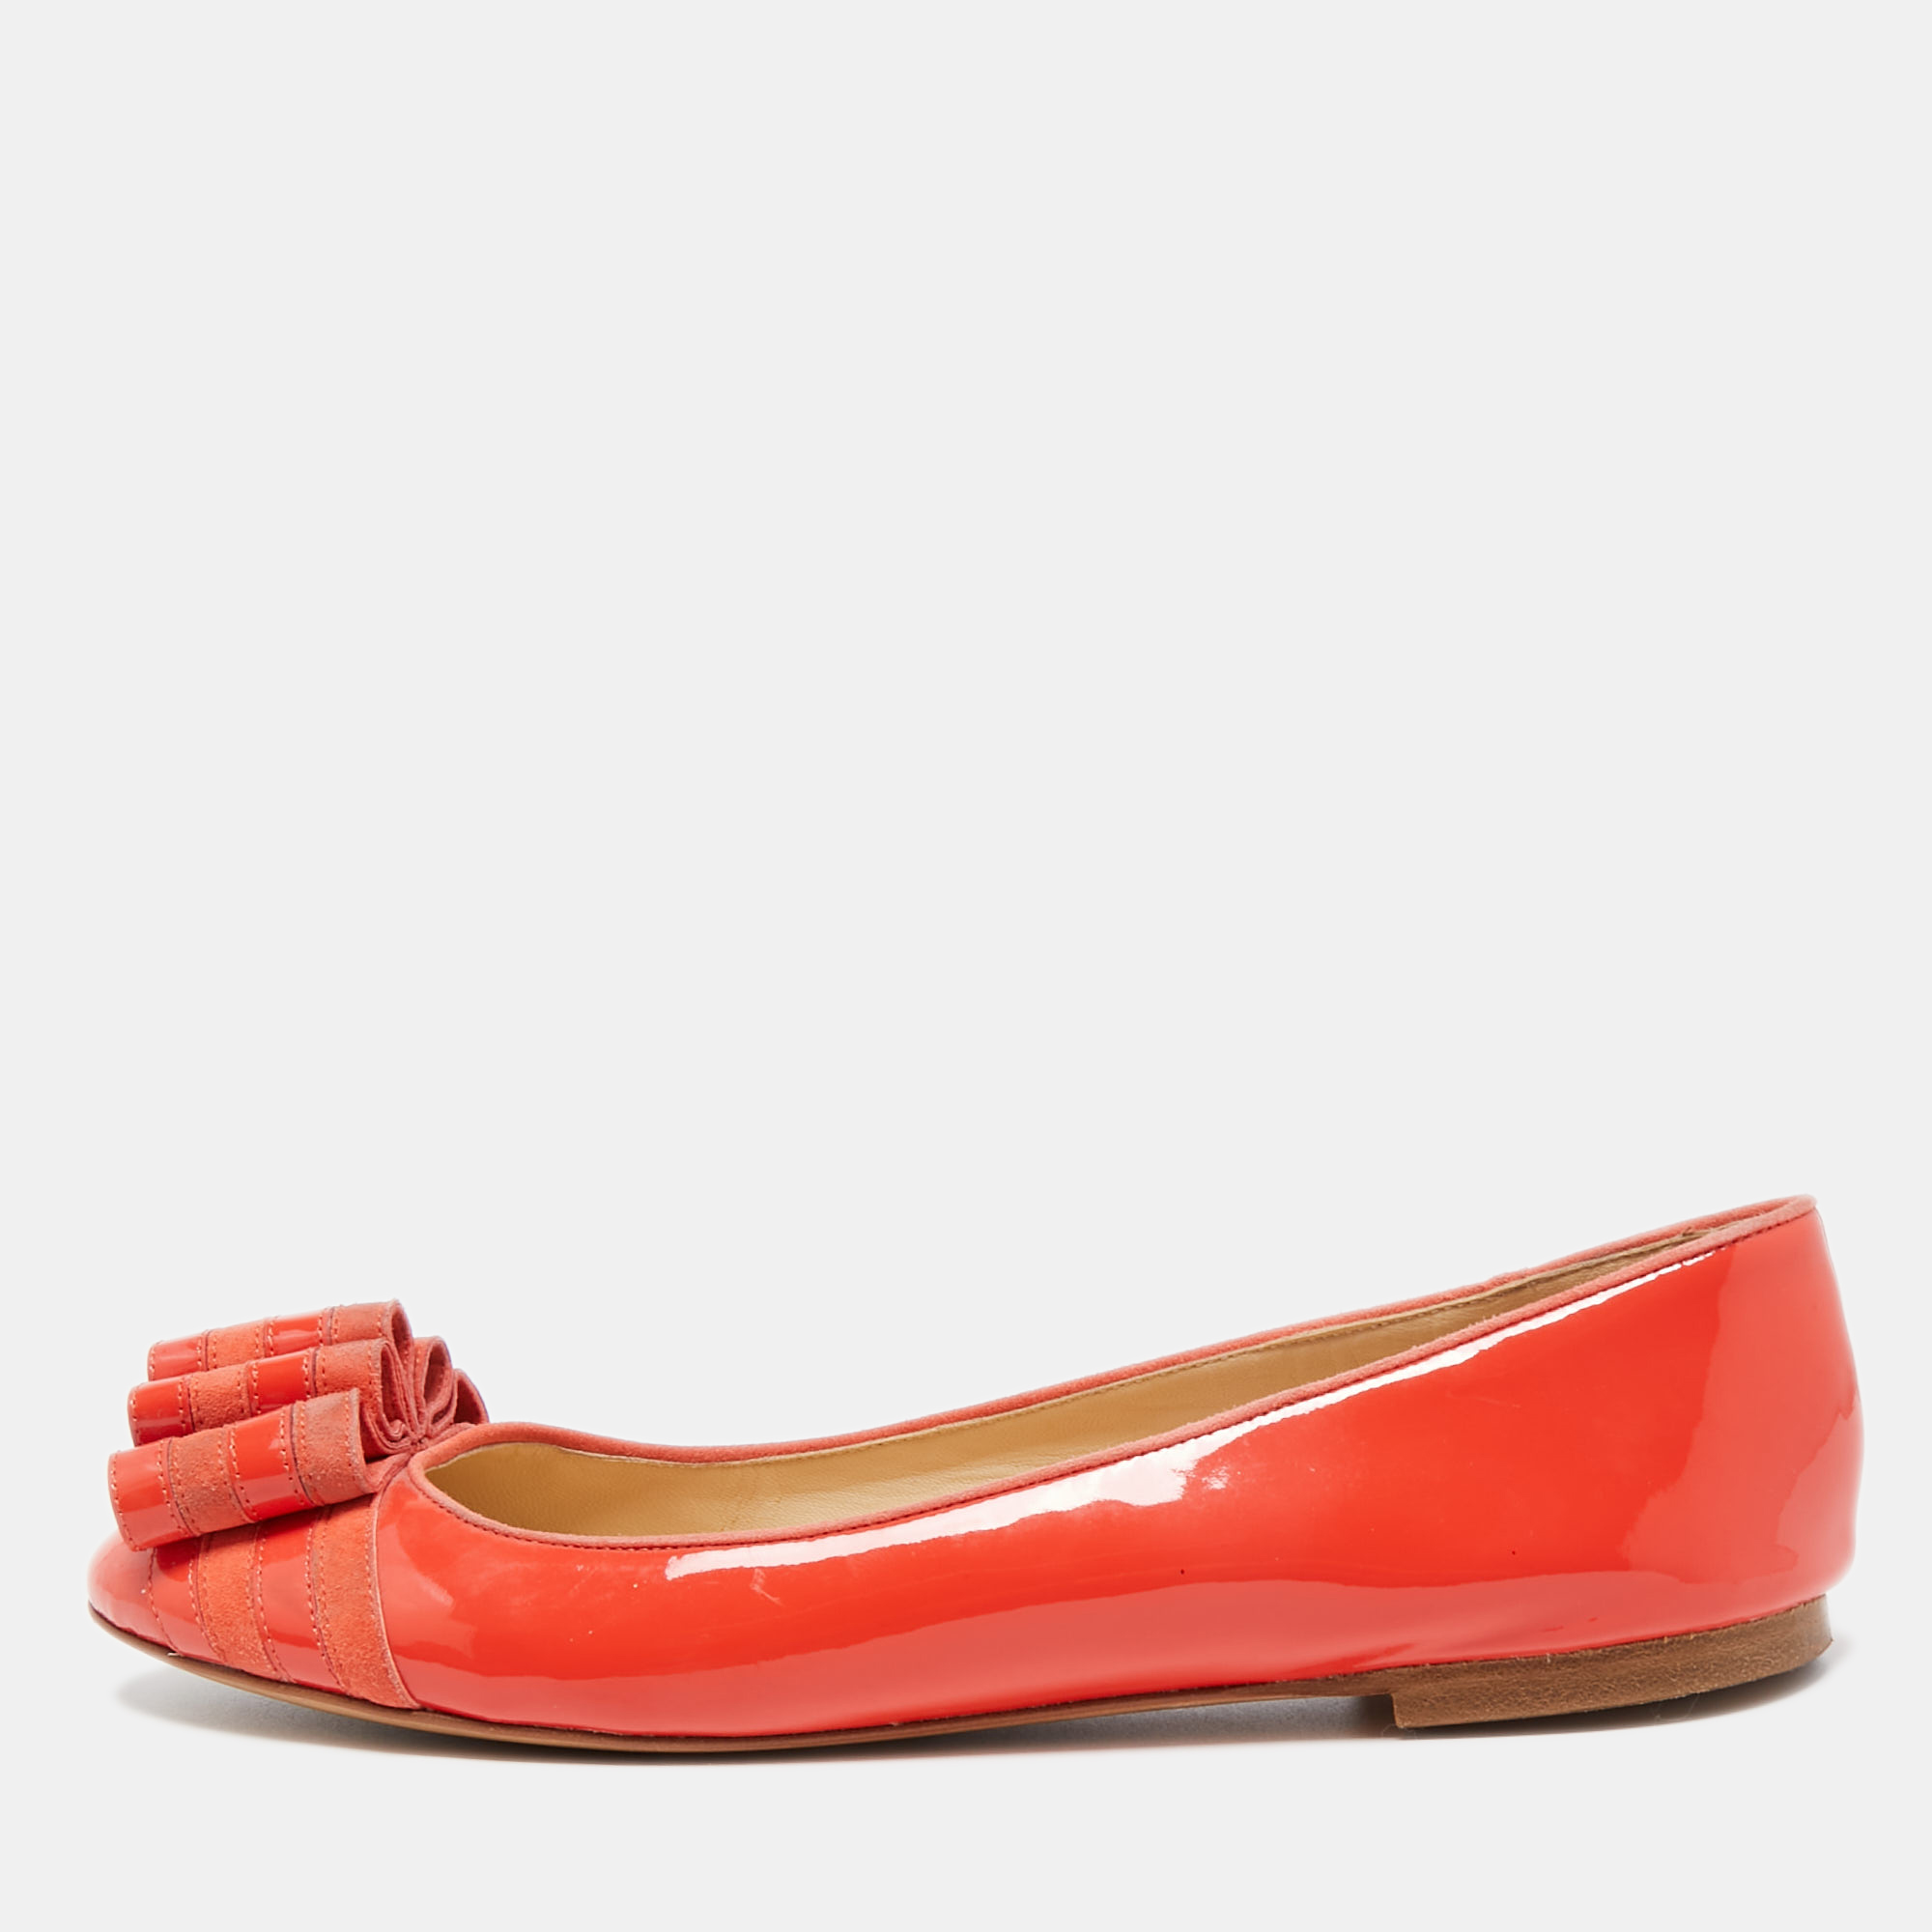 Pre-owned Moschino Orange Patent Leather Ballet Flats Size 40